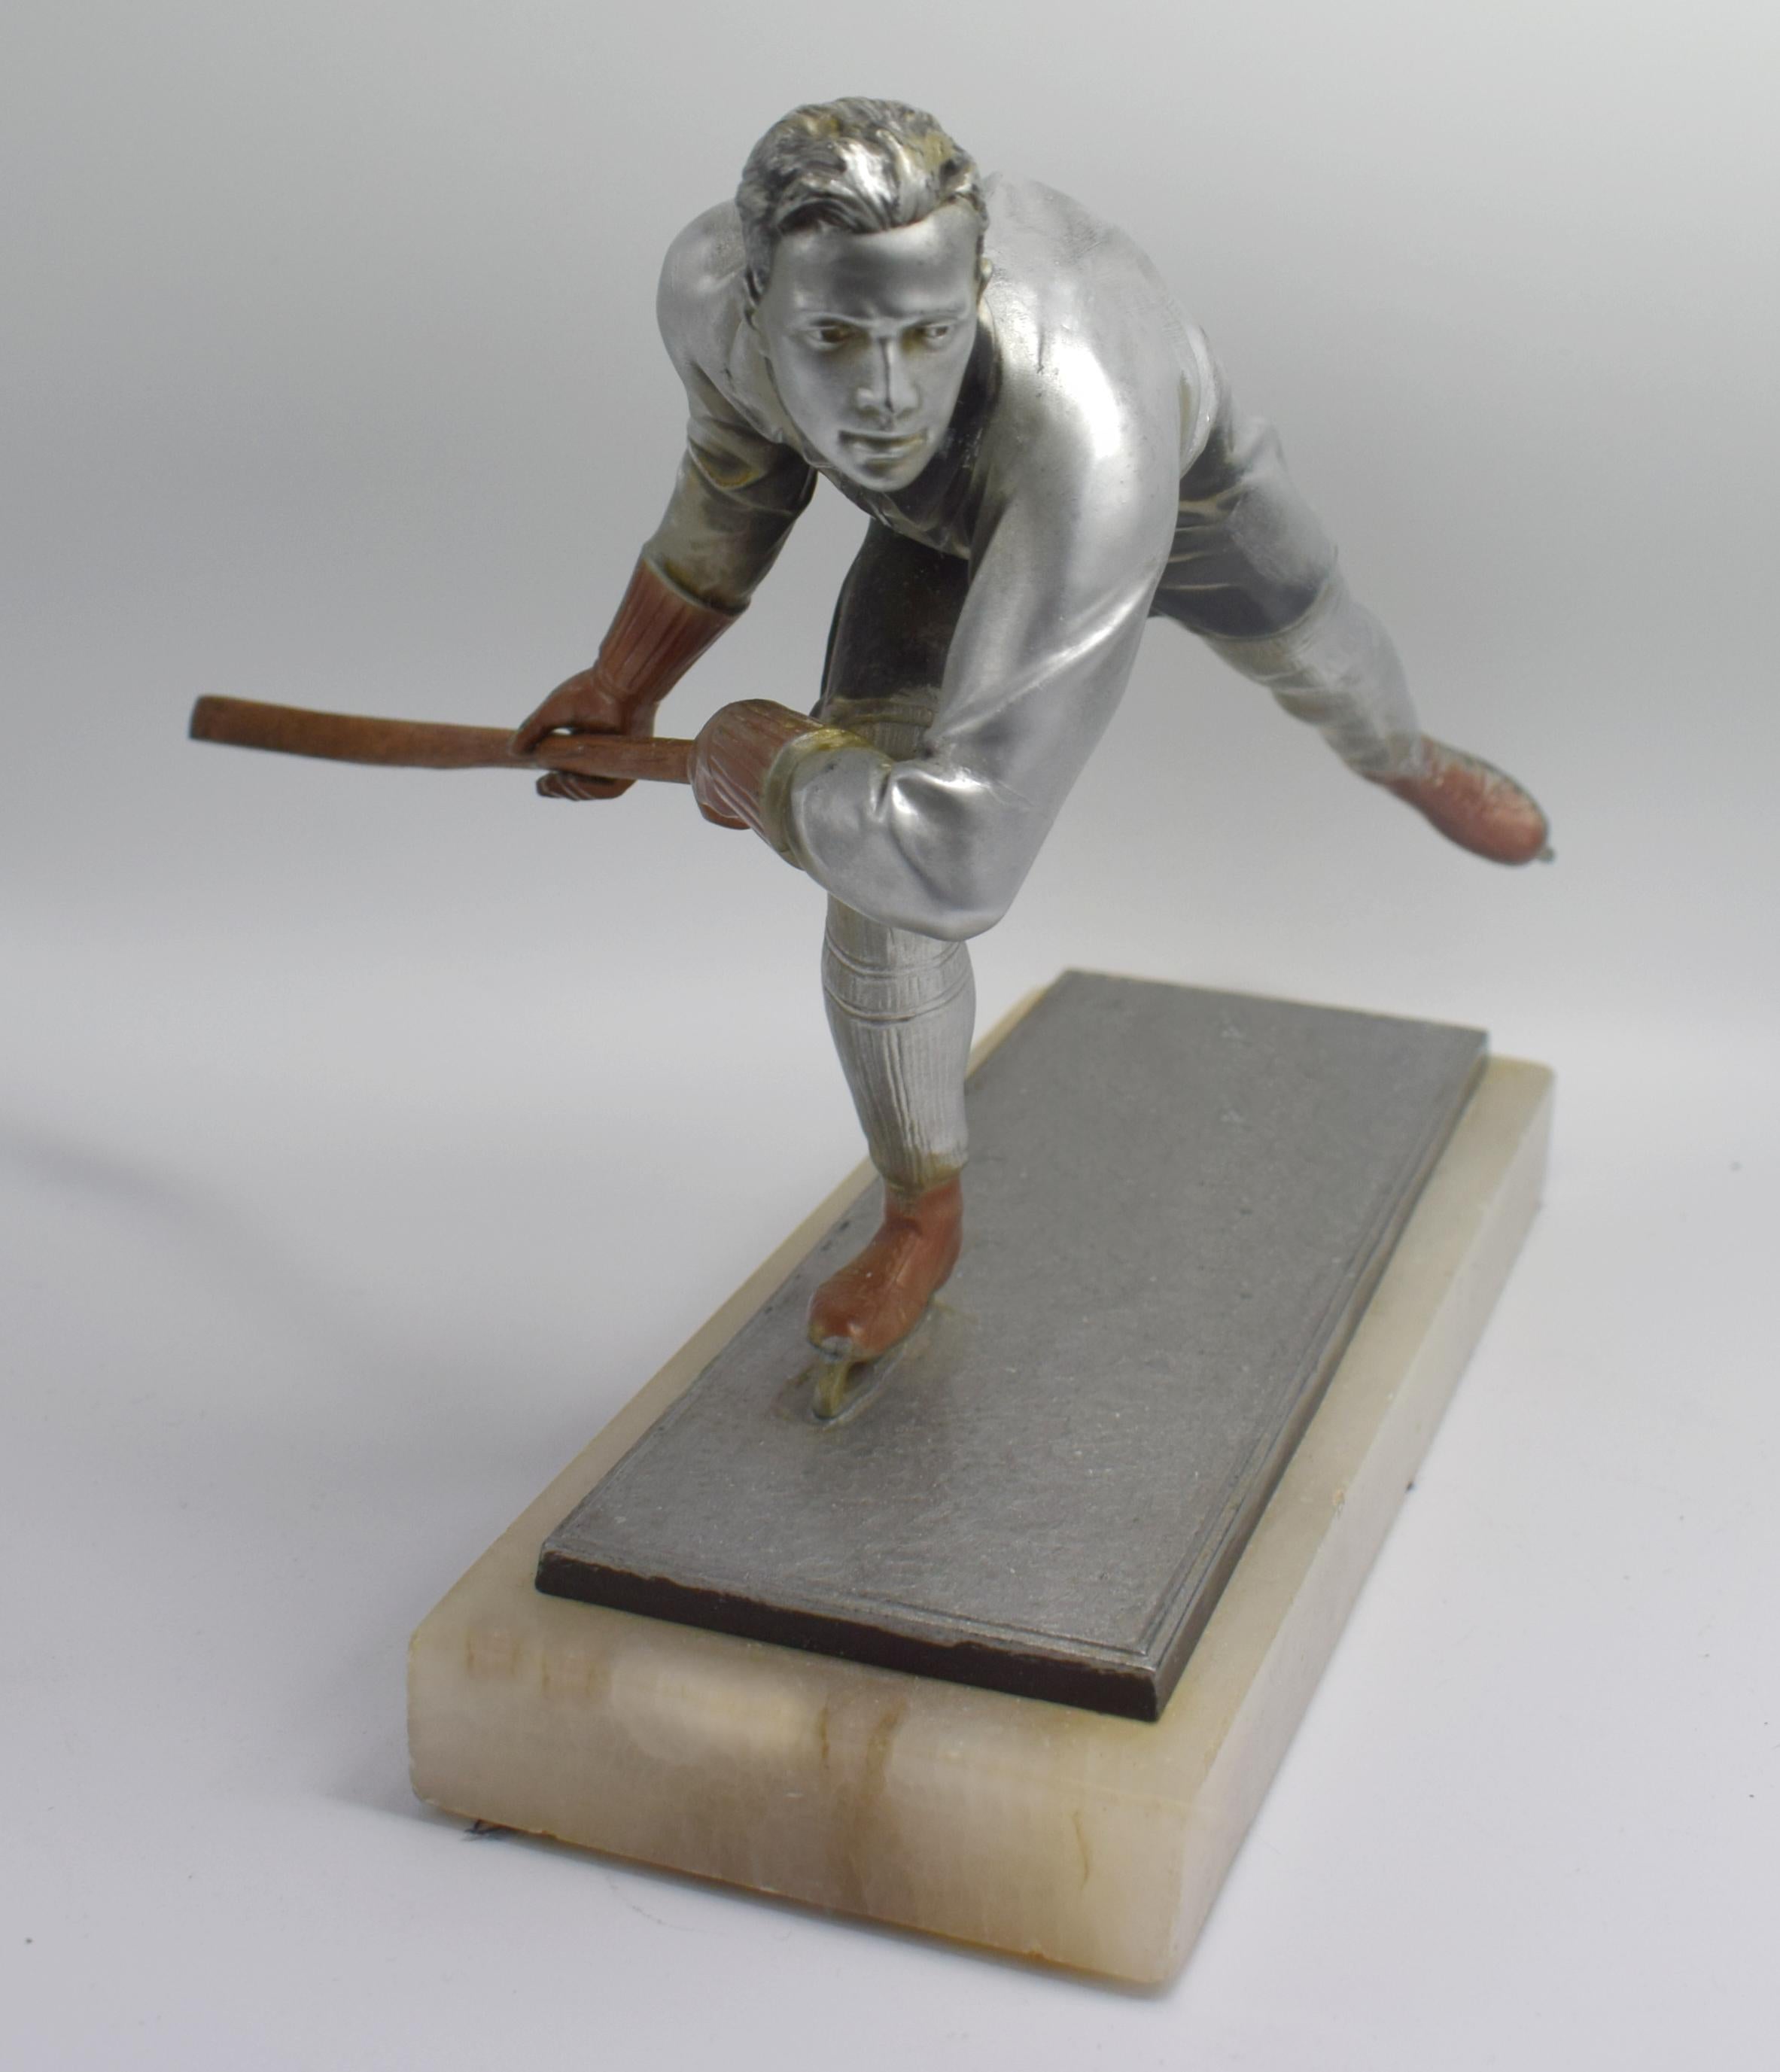 Beautifully detailed and crafted Art Deco male ice skater figure in silvered spelter dating to the 1930s. He's unsigned but attributed to Josef Lorenzl. From any angle he gracefully poses a movement. His condition is very good with minimal signs